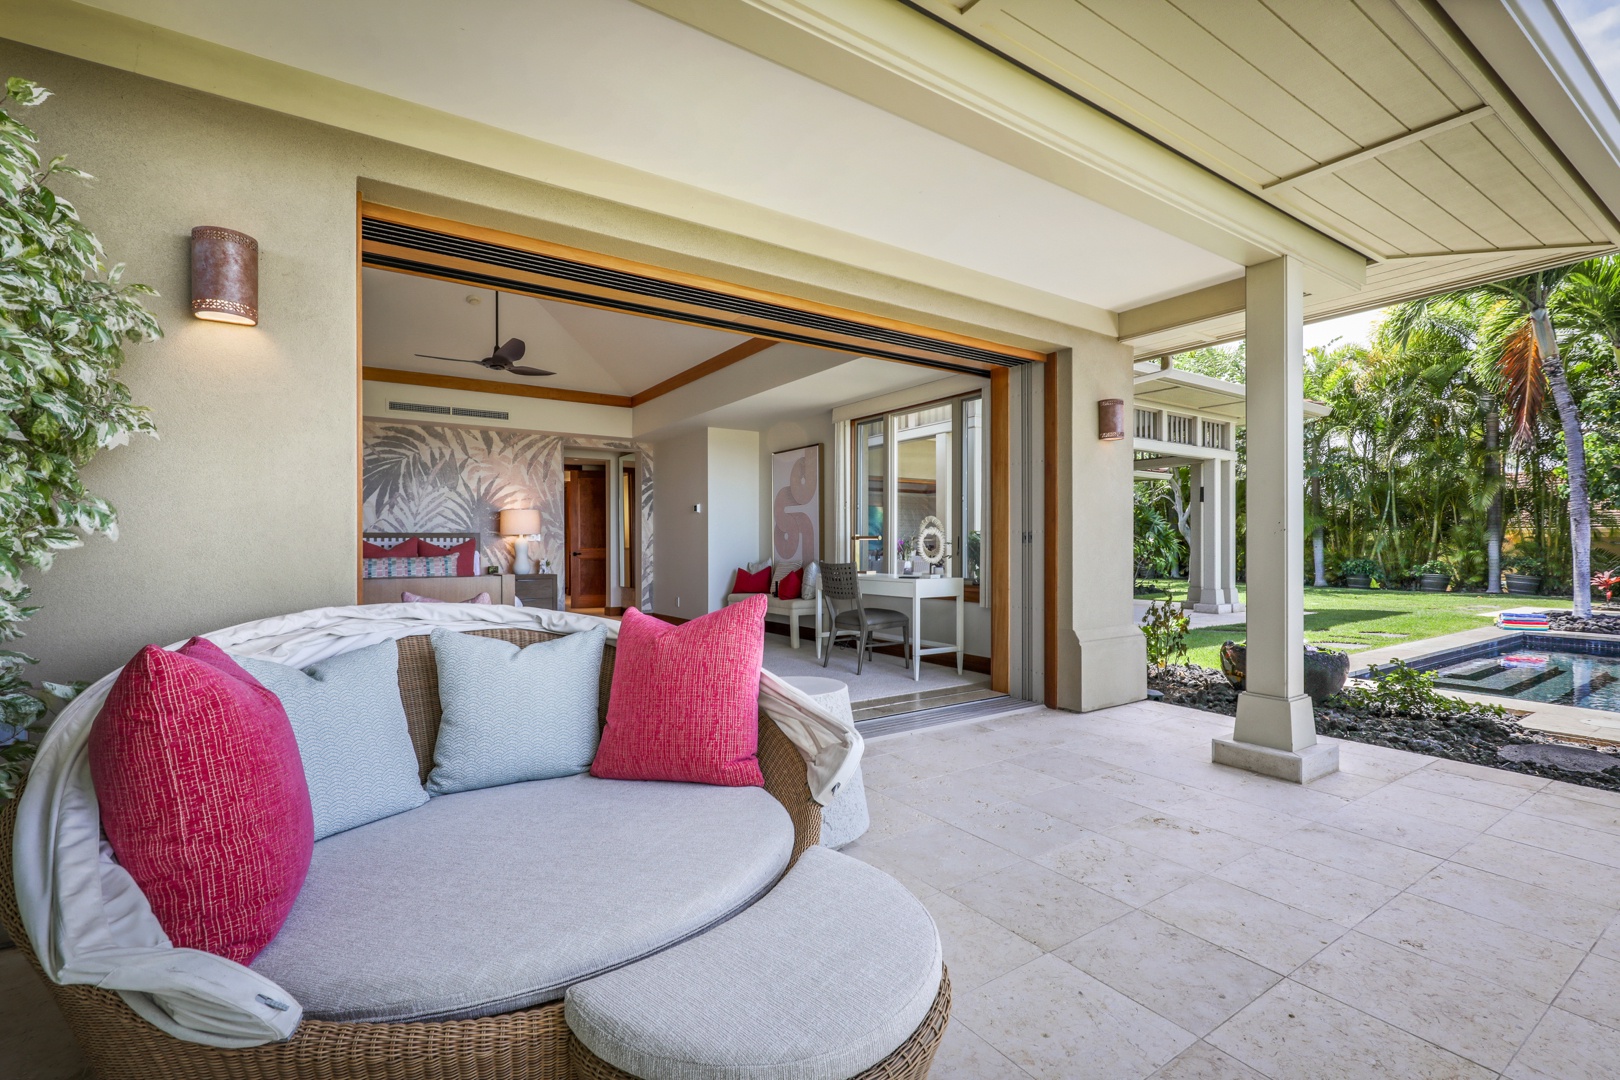 Kailua Kona Vacation Rentals, 4BD Hainoa Estate (122) at Four Seasons Resort at Hualalai - Primary suite lanai with daybed for those luxurious lazy afternoons.